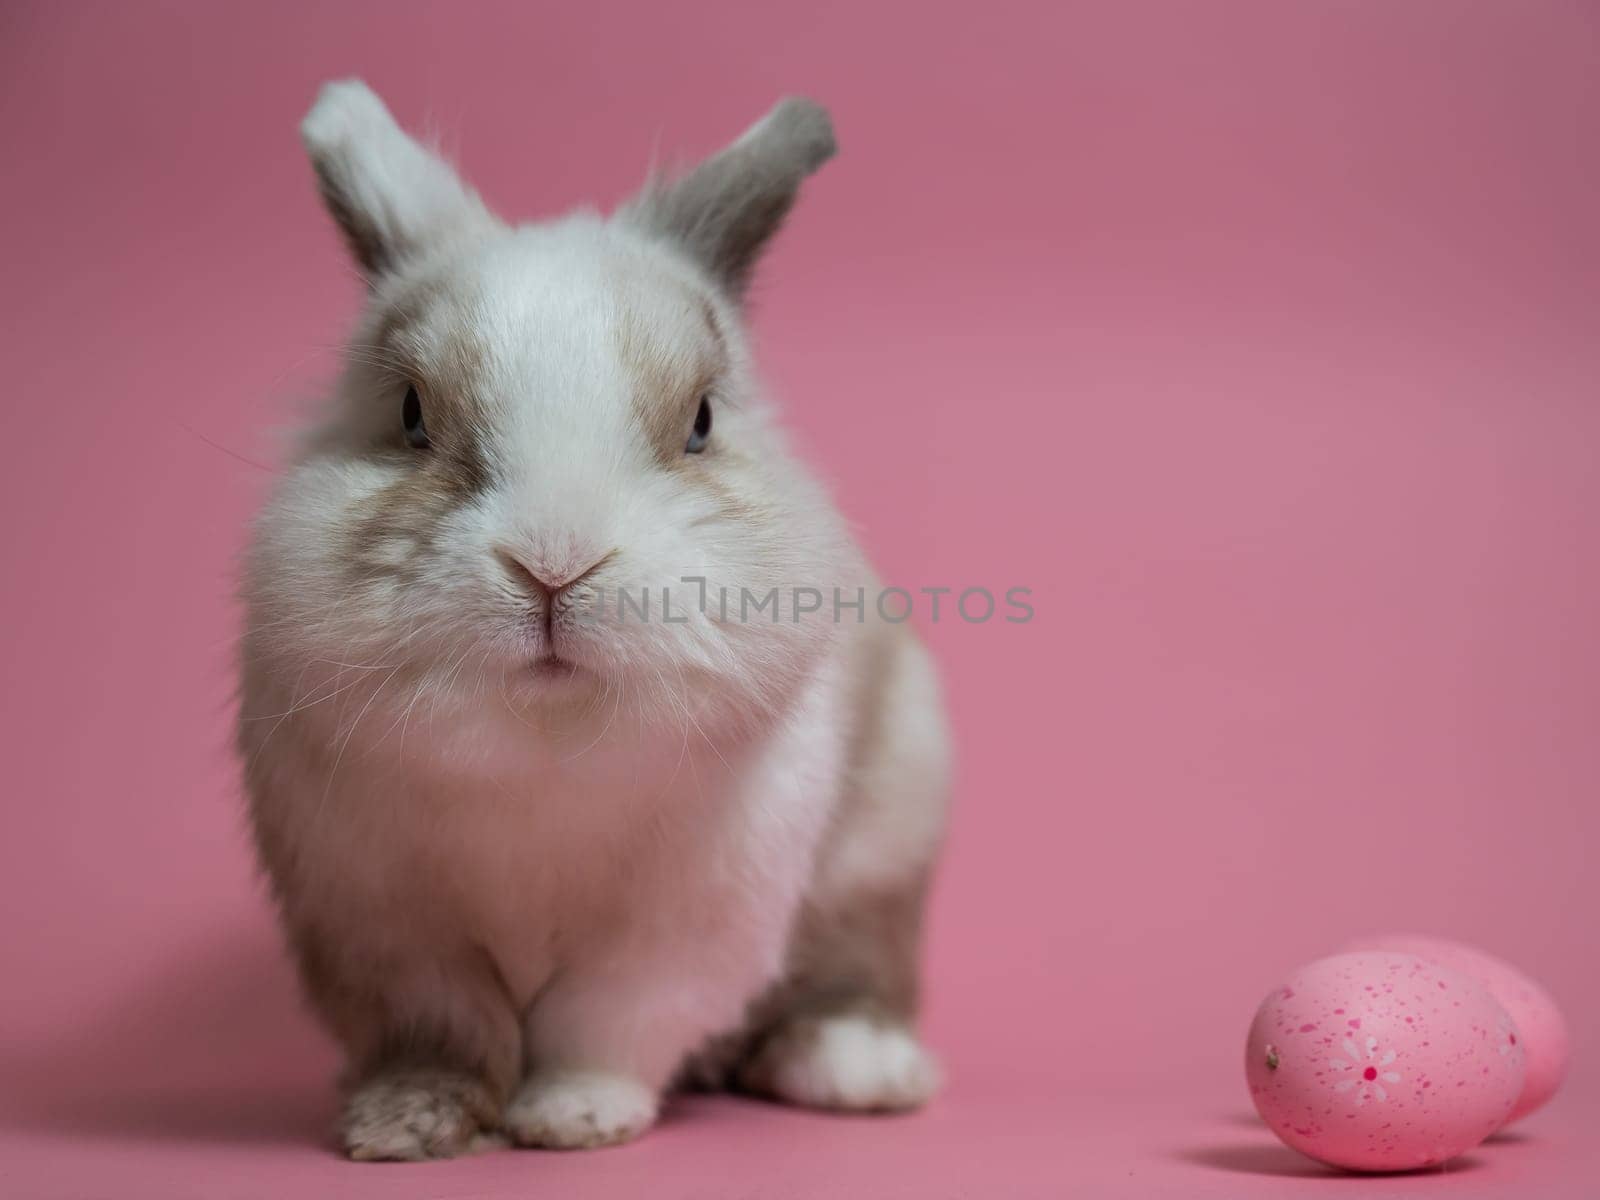 Easter Bunny on a pink background with a painted egg. by mrwed54